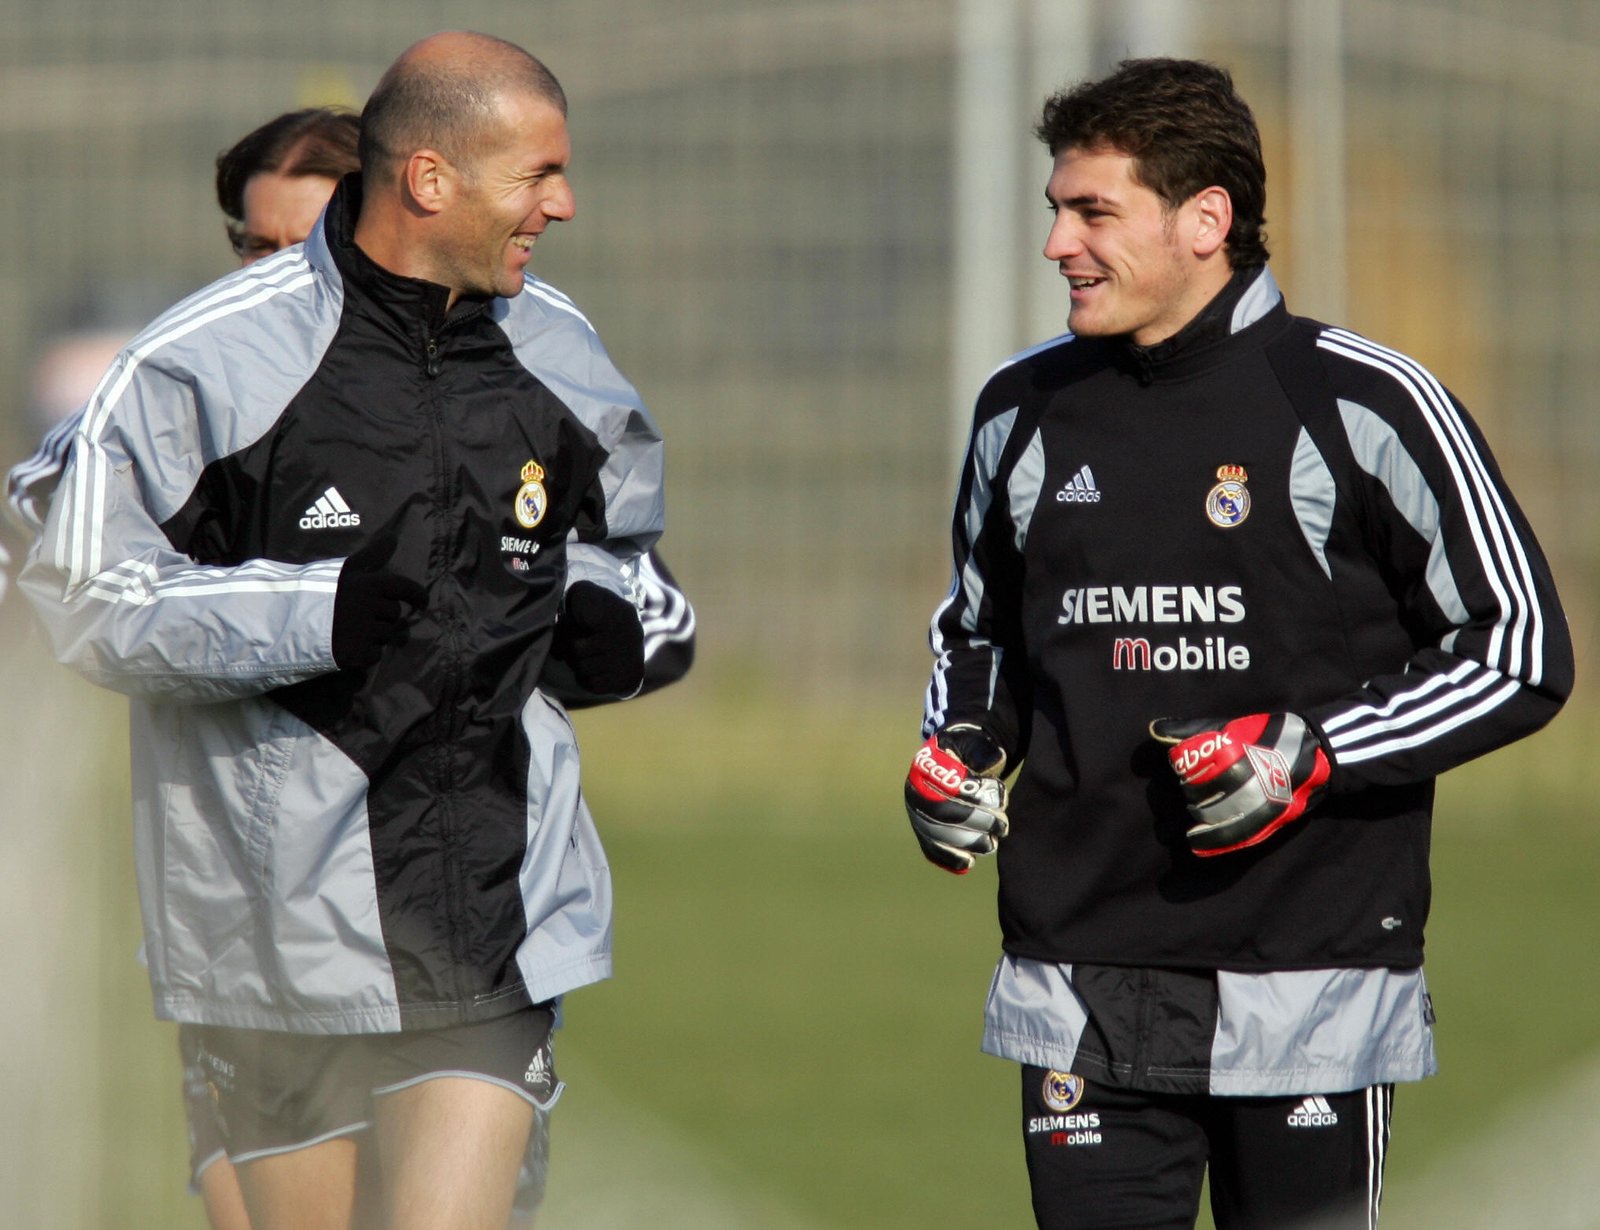 MADRID, SPAIN: Real Madrid's French player Zinedine Zidane (L) jokes with Iker Casillas (R) 22 November 2004 during a training session at Las Rozas football city near Madrid prior their 23 November 2004 Champions League football match against Bayer Leverkusen in Madrid. AFP PHOTO/ JAVIER SORIANO (Photo credit should read JAVIER SORIANO/AFP via Getty Images)